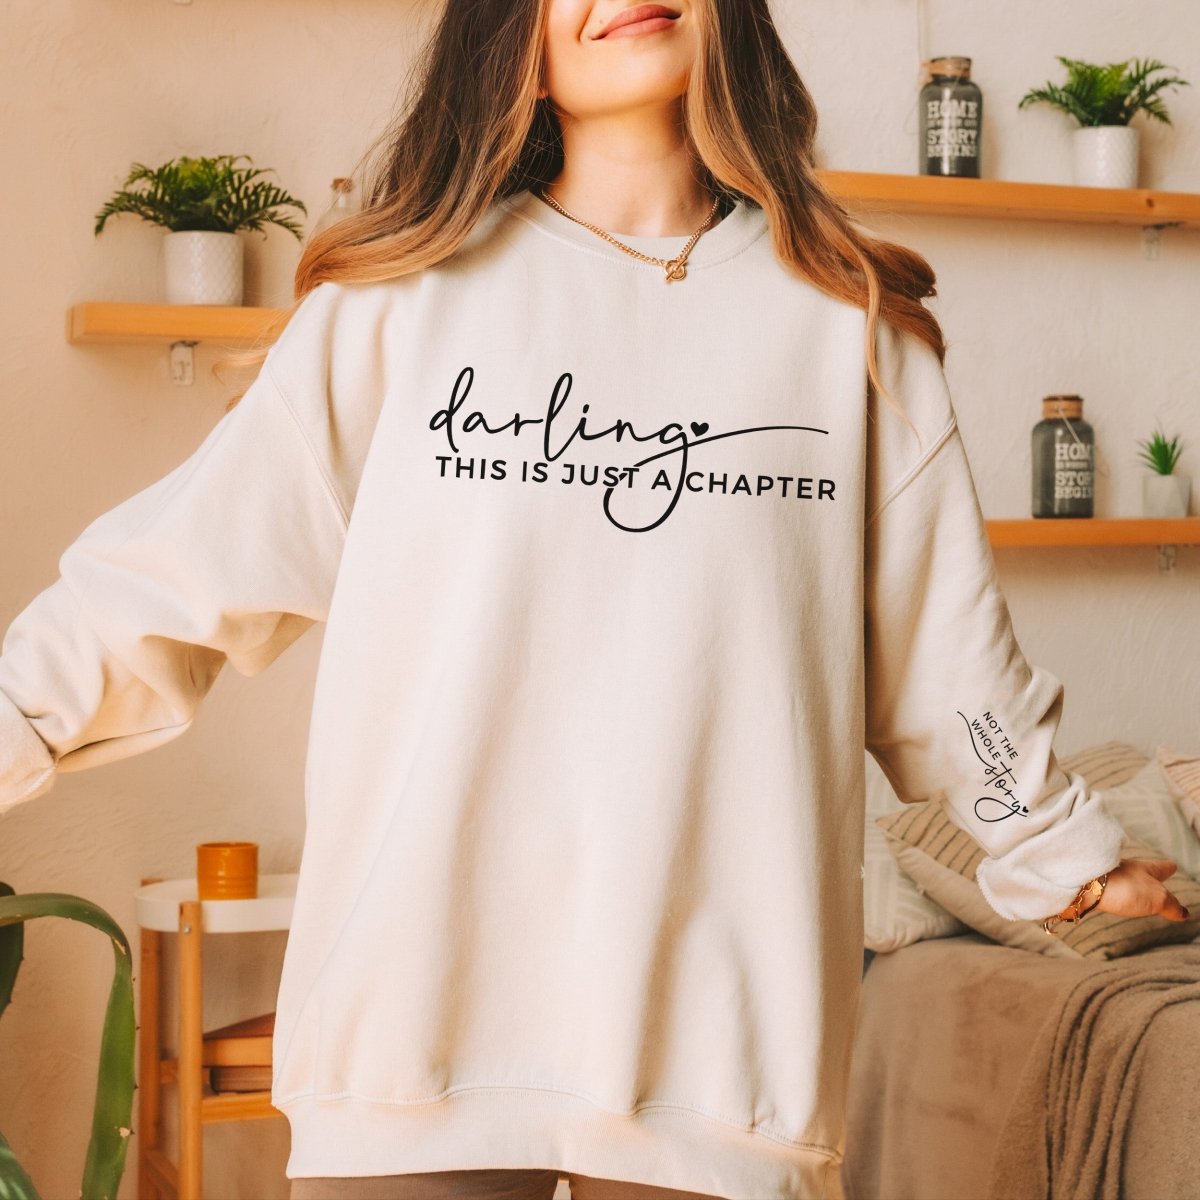 Darling This is Just a Chapter - Not the Whole Story Sleeve Crew Sweatshirt - Limeberry Designs